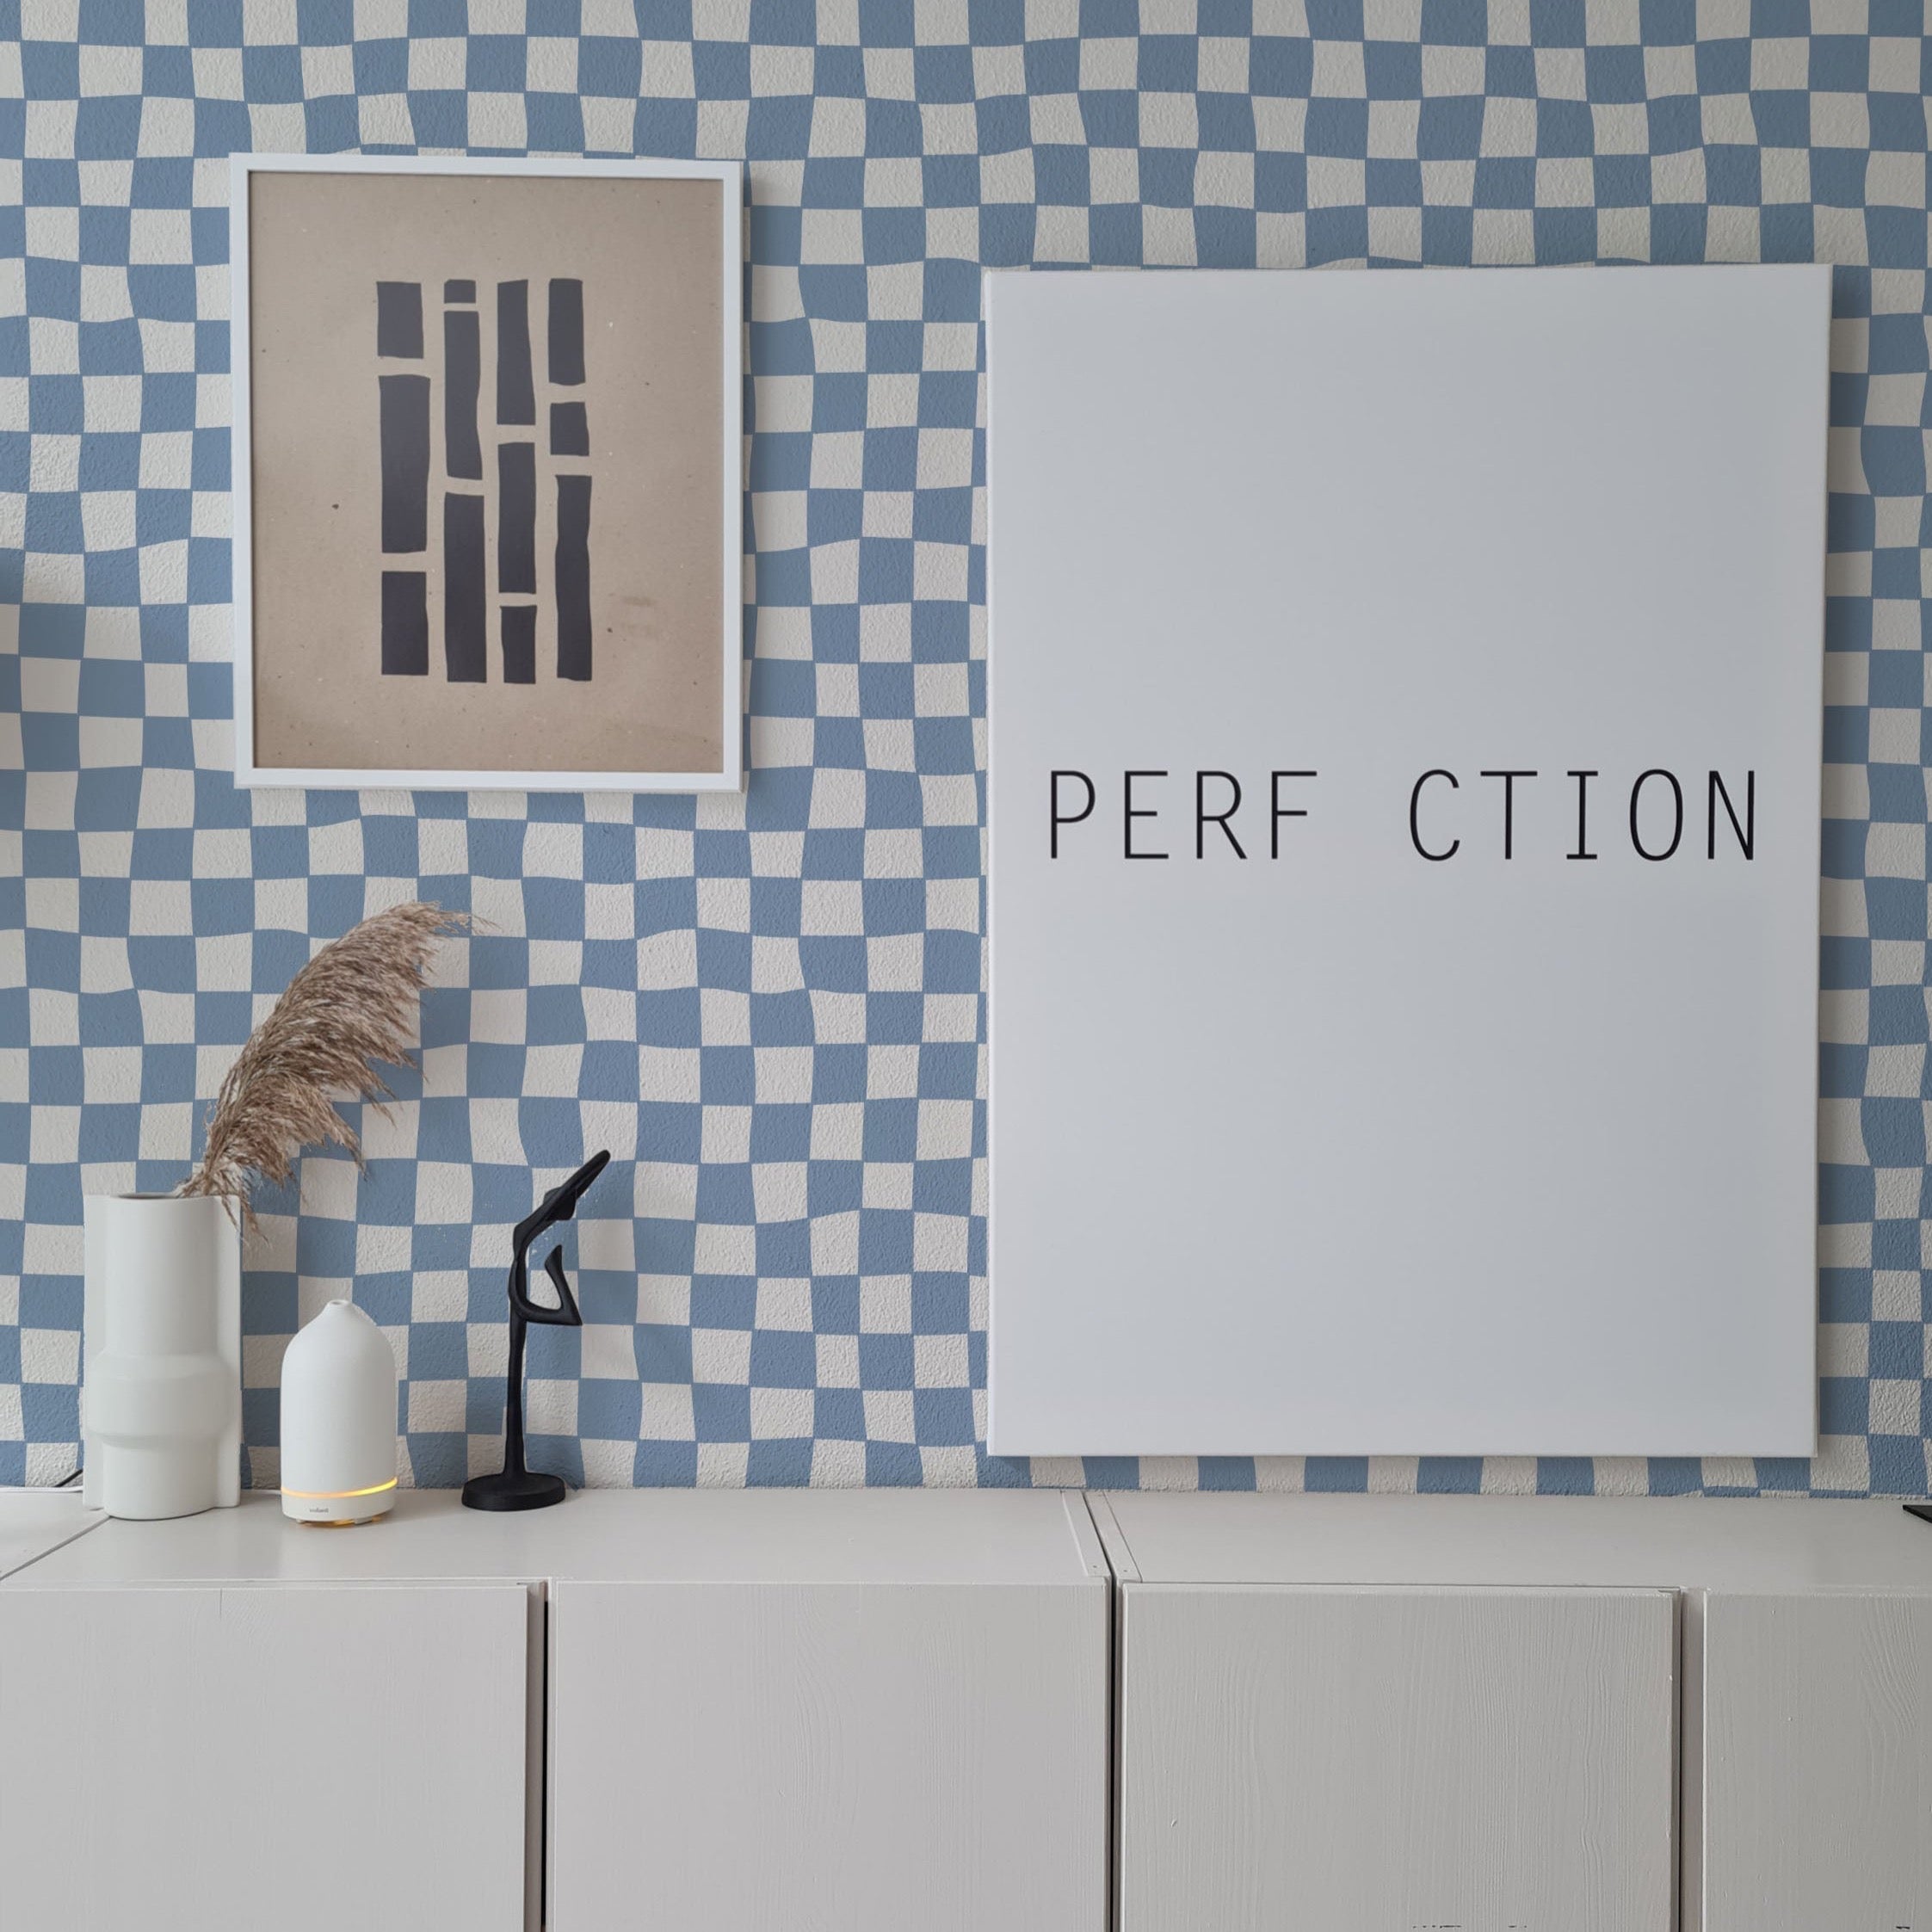 A minimalistic interior design featuring a blue and white checkered wallpaper that covers the entire room. A framed abstract art piece hangs on the left, beside a large poster with the text "PERFECTION" missing the first and last letters. The decor includes a small sculpture, a couple of modern vases, and a cylindrical lamp on a low white cabinet.